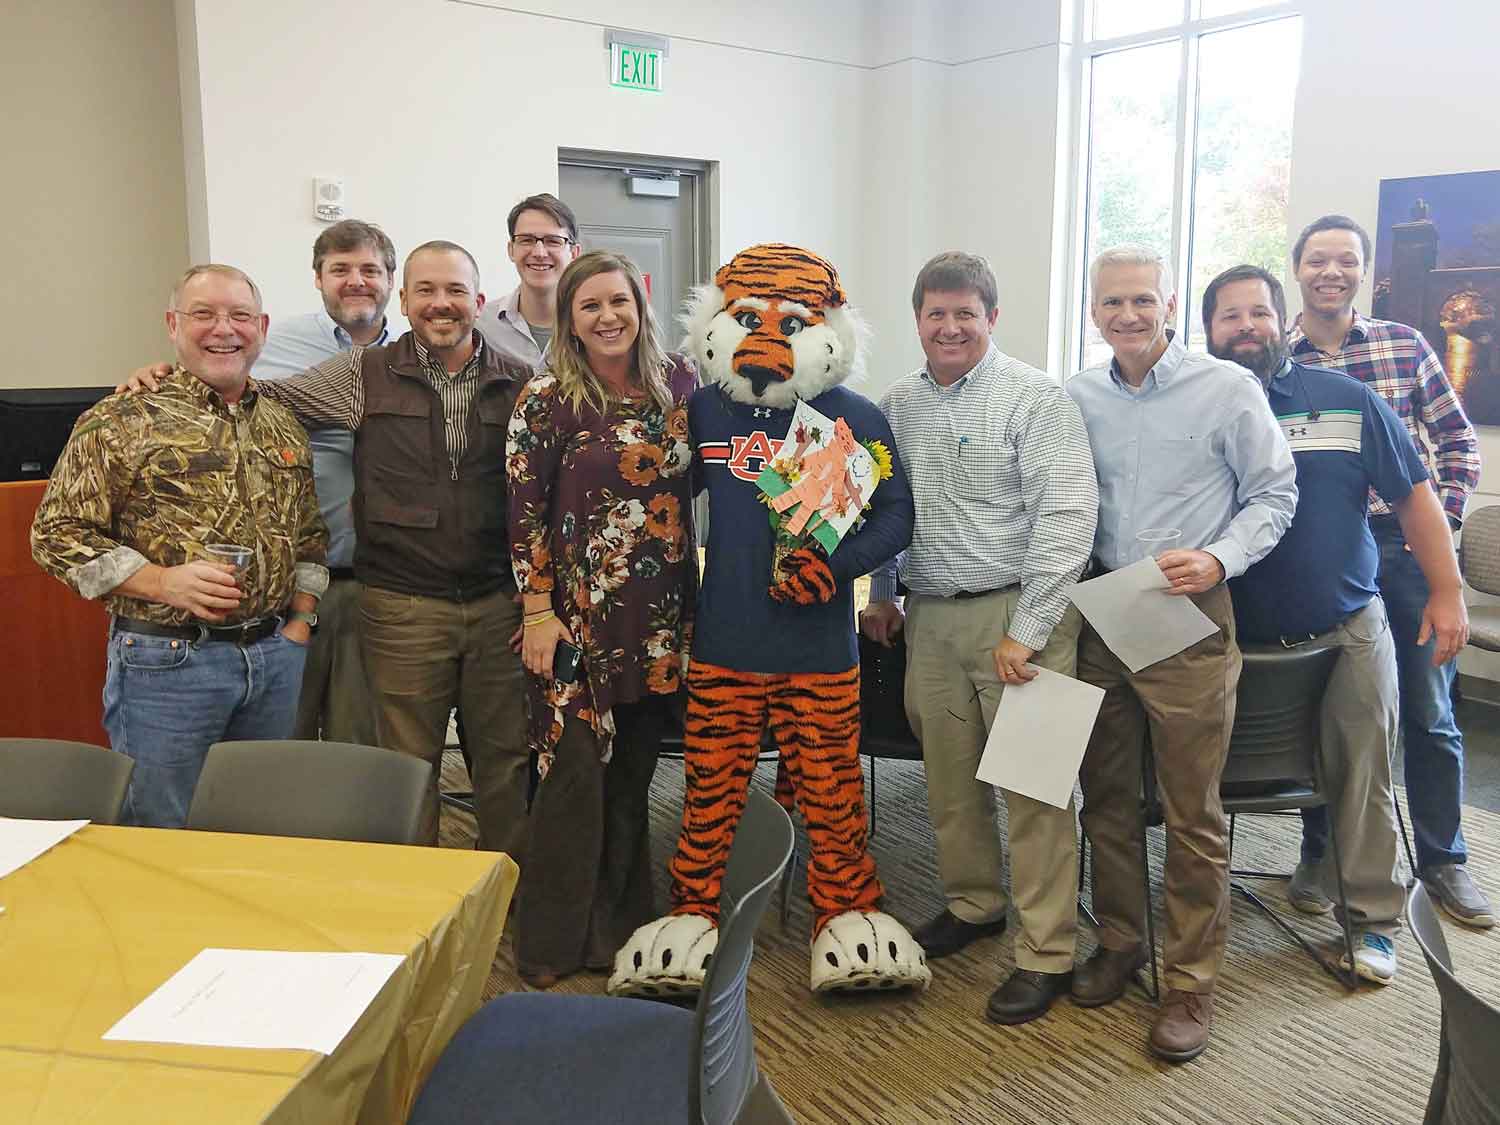 OIT Employees with Aubie at the 2018 Thanksgiving Potluck